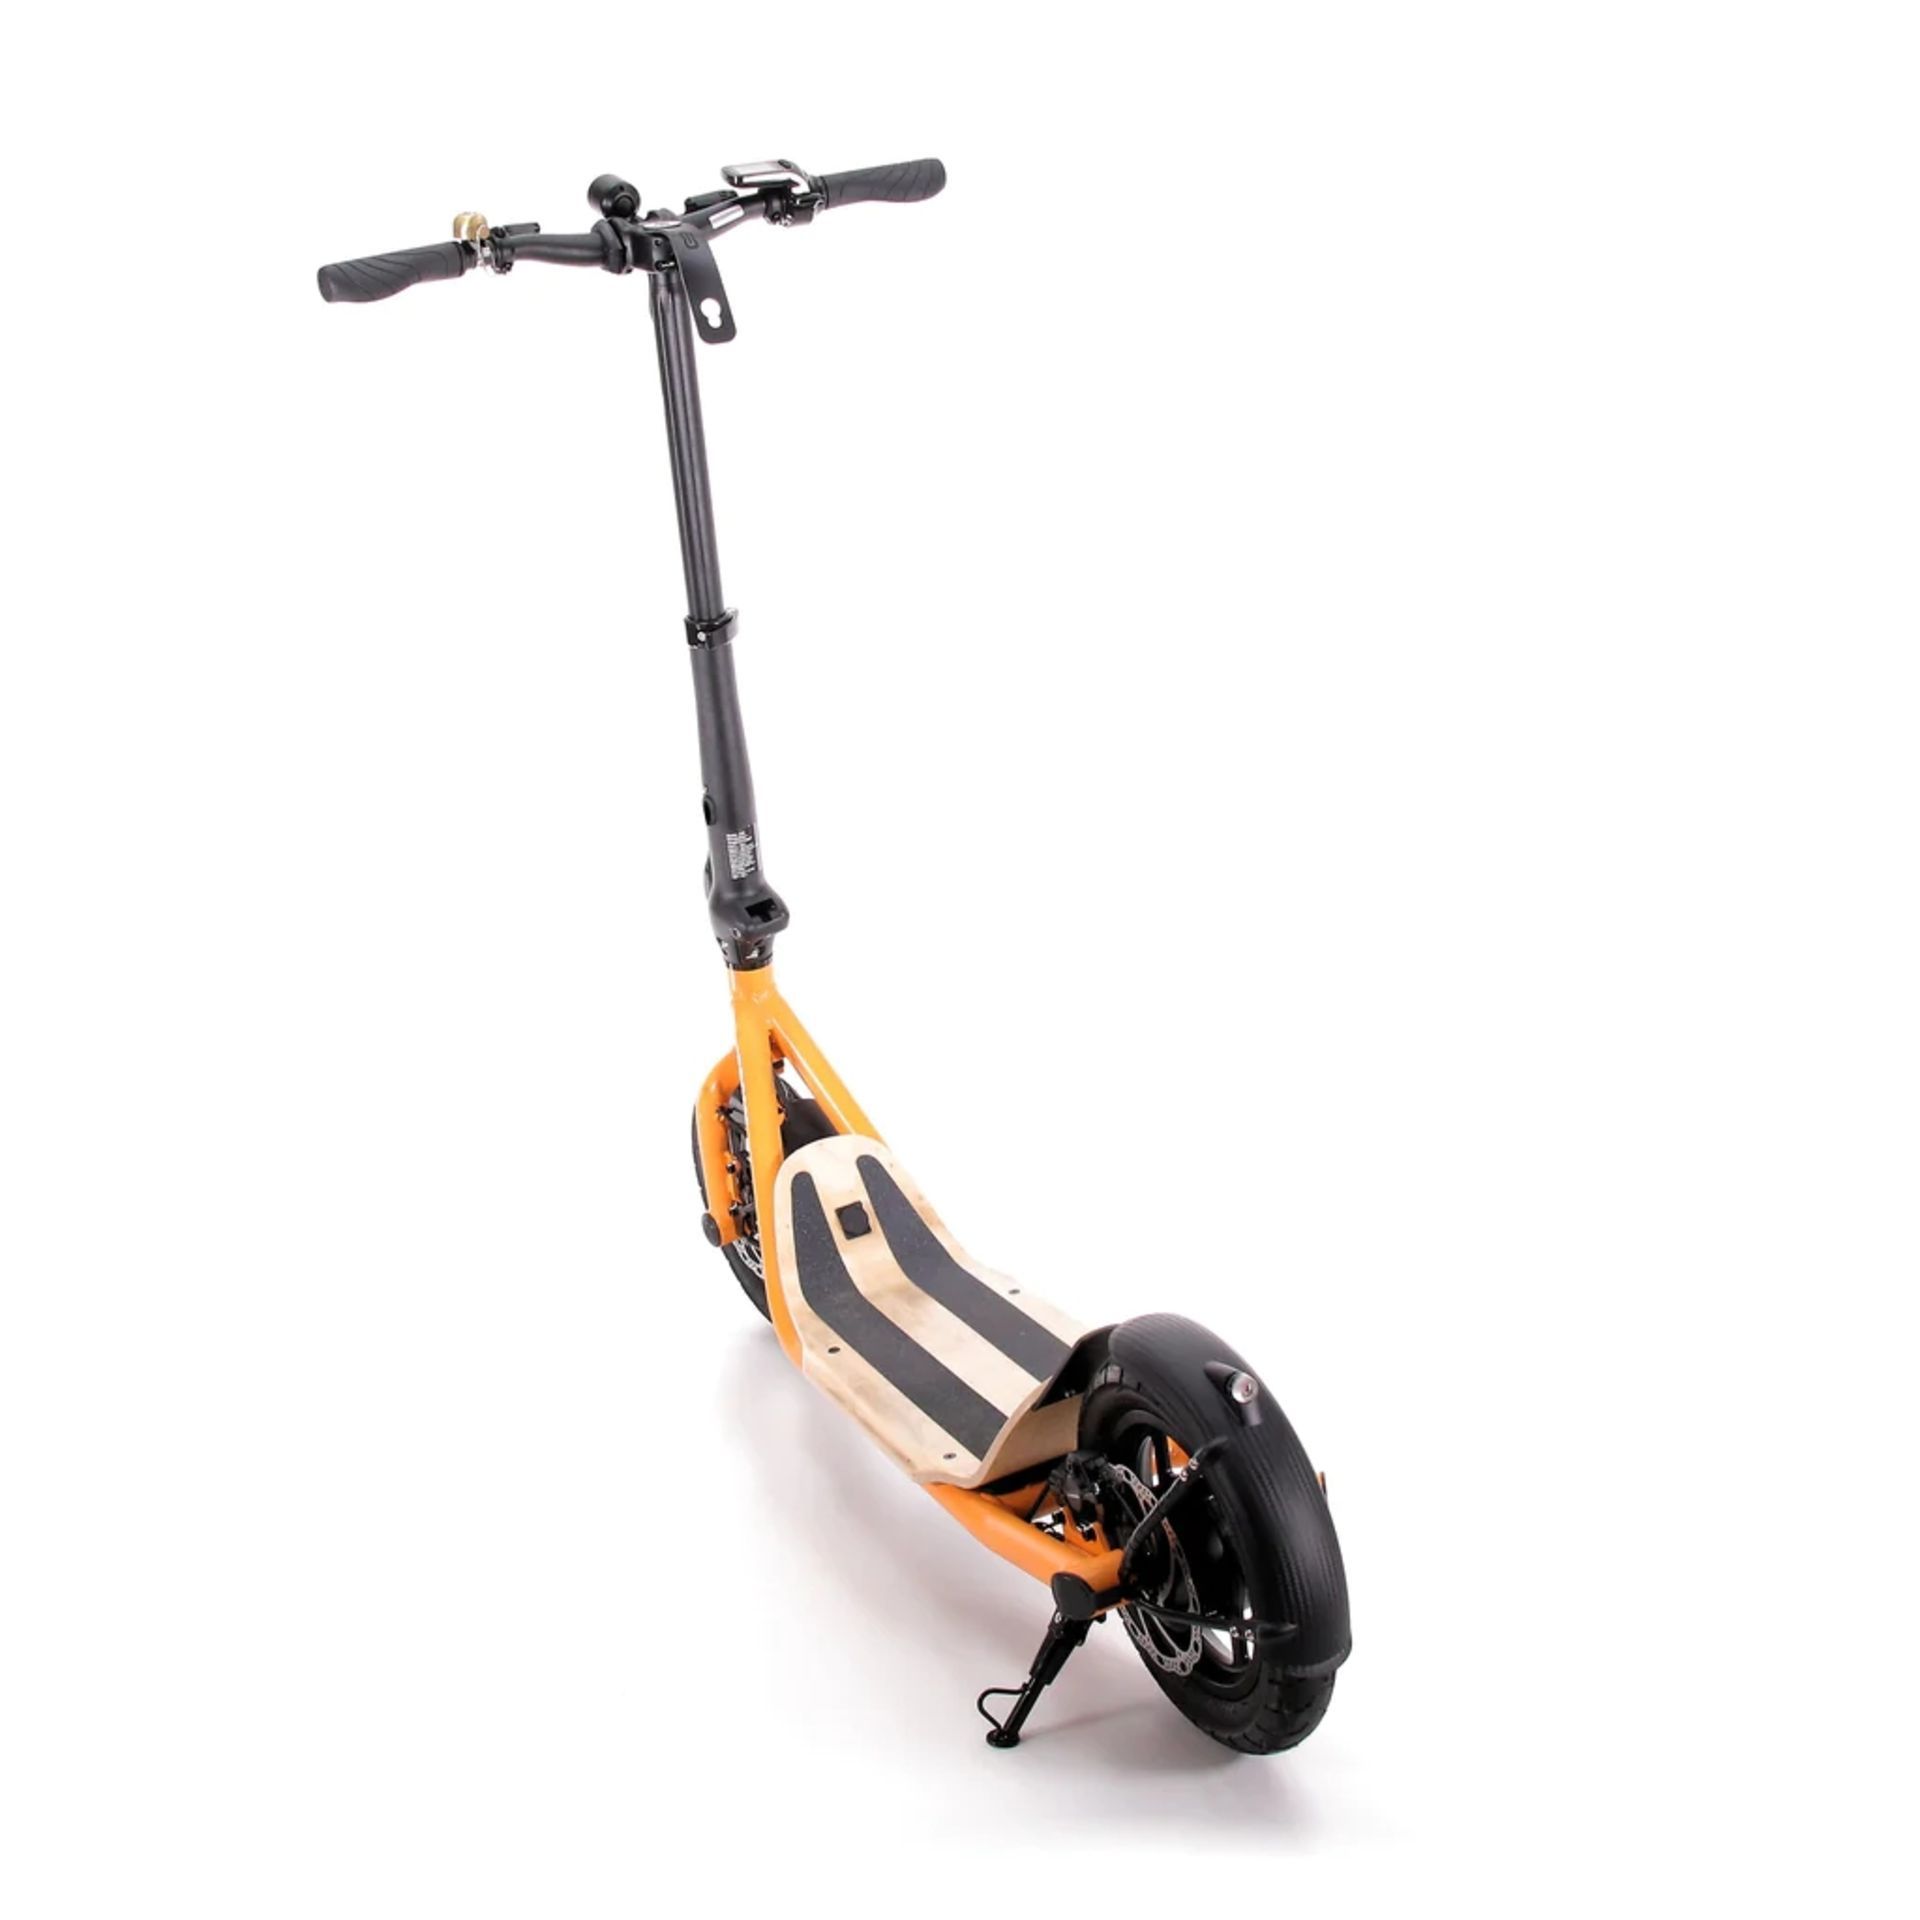 BRAND NEW 8TEV B12 PROXI ELECTRIC SCOOTER ORANGE RRP £1299, Perfect city commuter vehicle with - Image 2 of 2